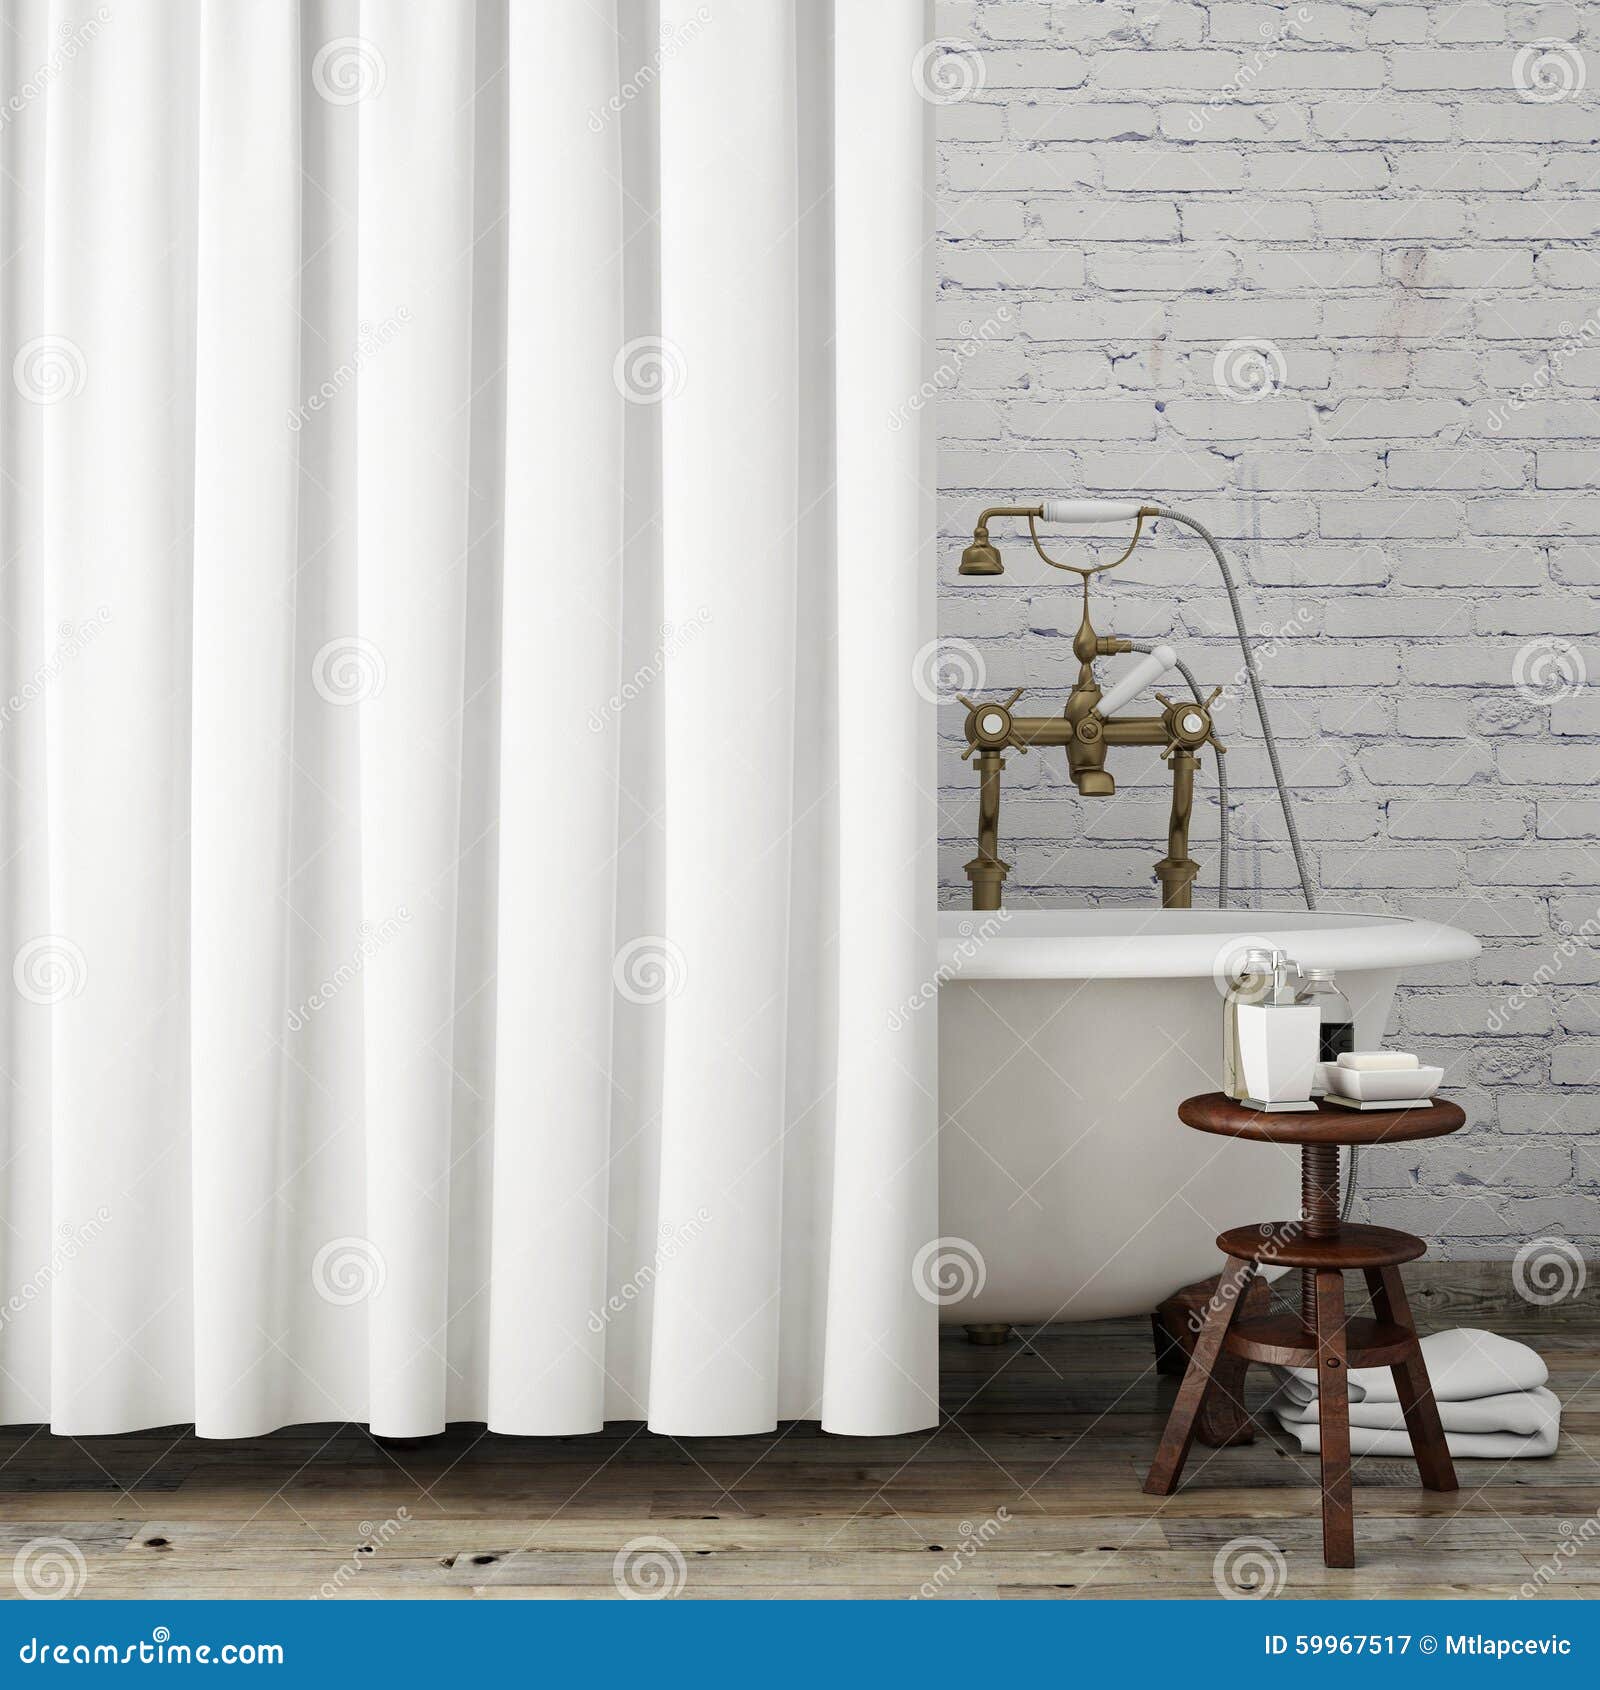 Download Mock Up Vintage Hipster Bathroom With White Curtains, Interior Background, Stock Image - Image ...